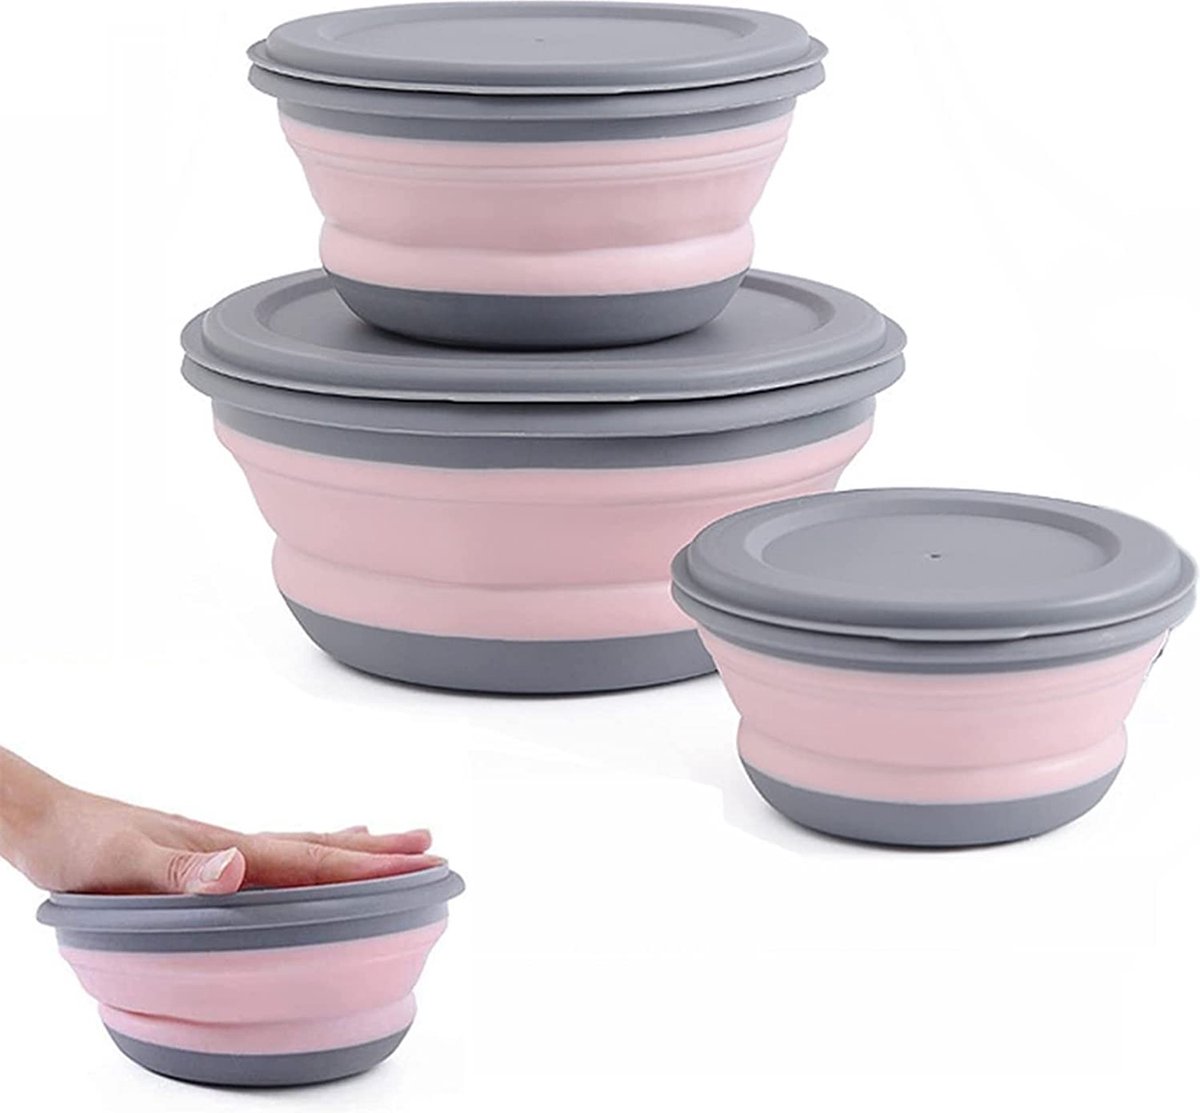 Container Opvouwbare Siliconen Kom Met Deksel Siliconen Bento Box Opvouwbare Foldable Food Storage Boxes Opvouwbare Siliconen Bak Foldable Bowl With Lid Voor Picknick Keuken